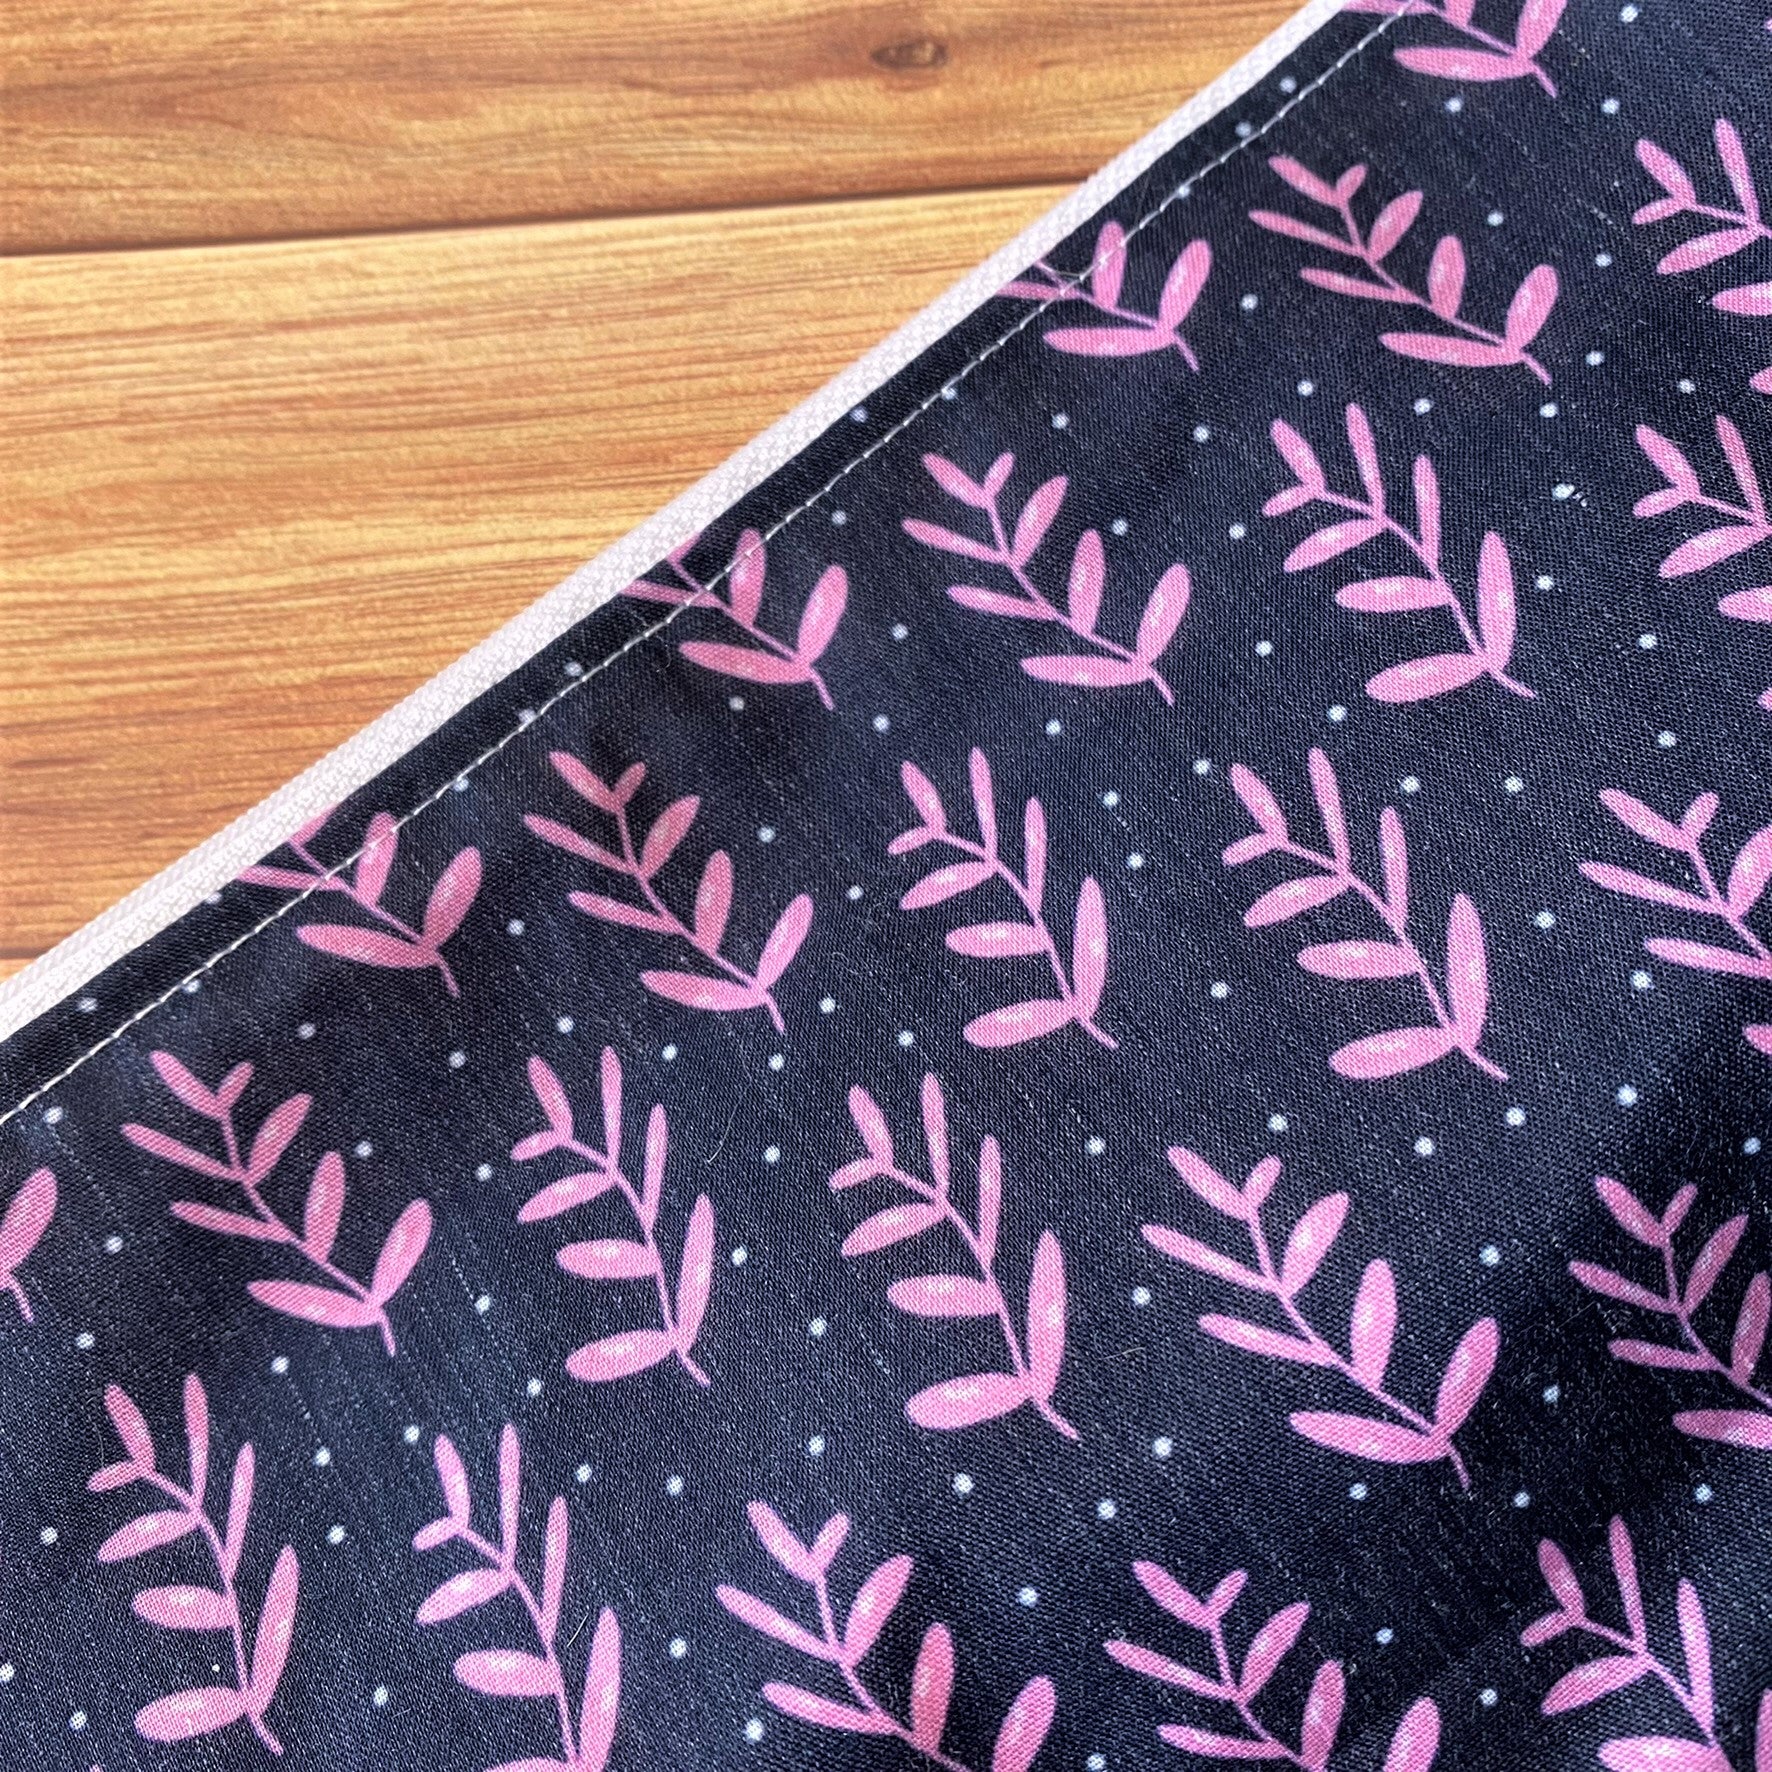 close up of the dark foliage pattern with pink leaves.